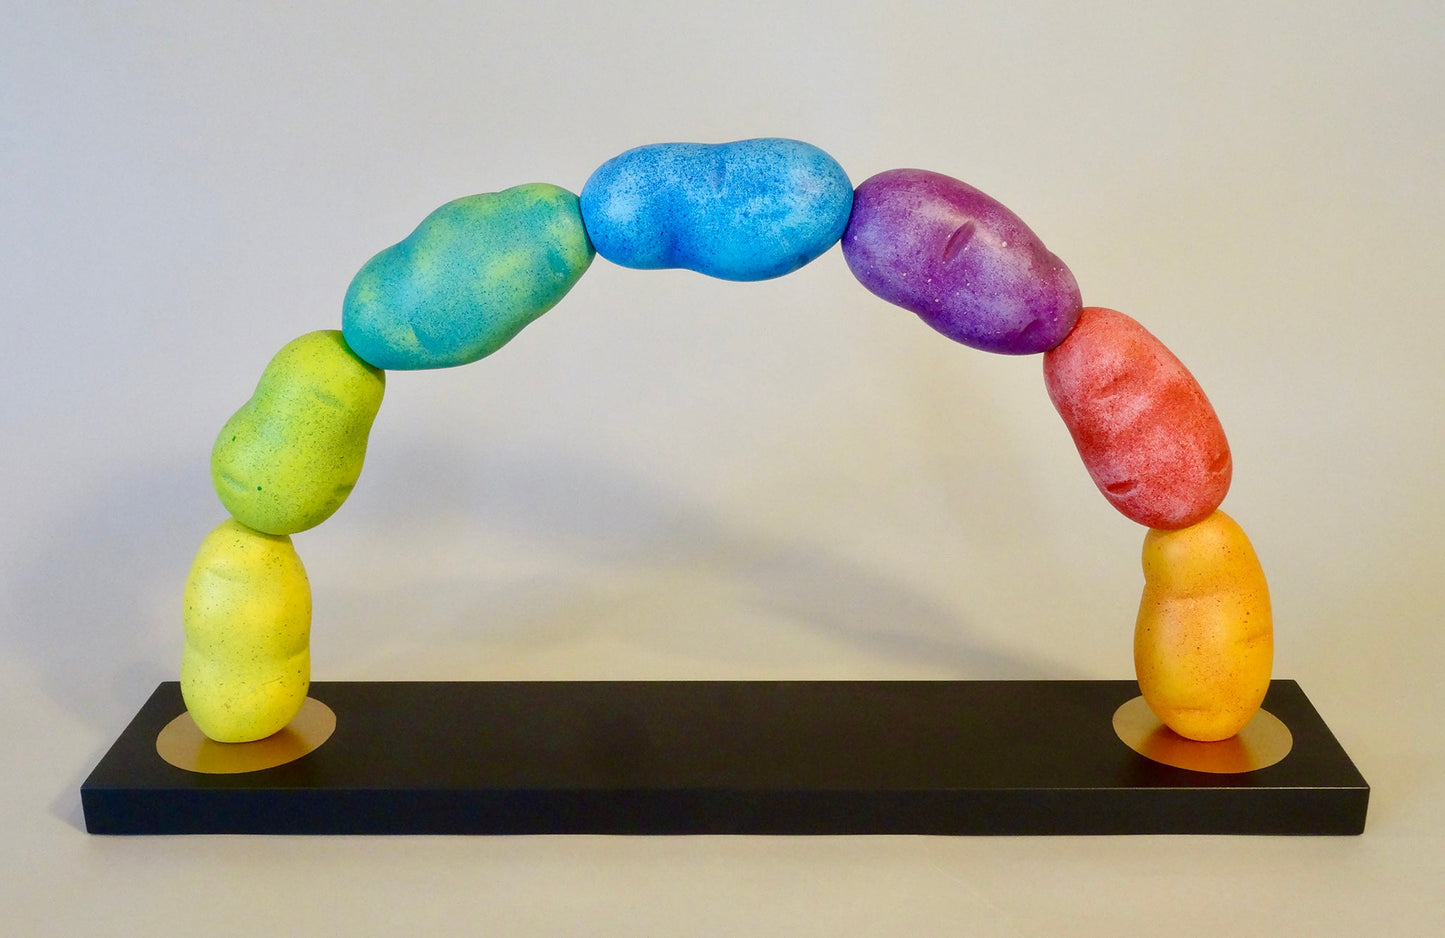 Wooden sculpture of seven potatoes arranged and painted in a rainbow formation. 2019 13"x24"x4.5" painted wood by Sean O'Meallie